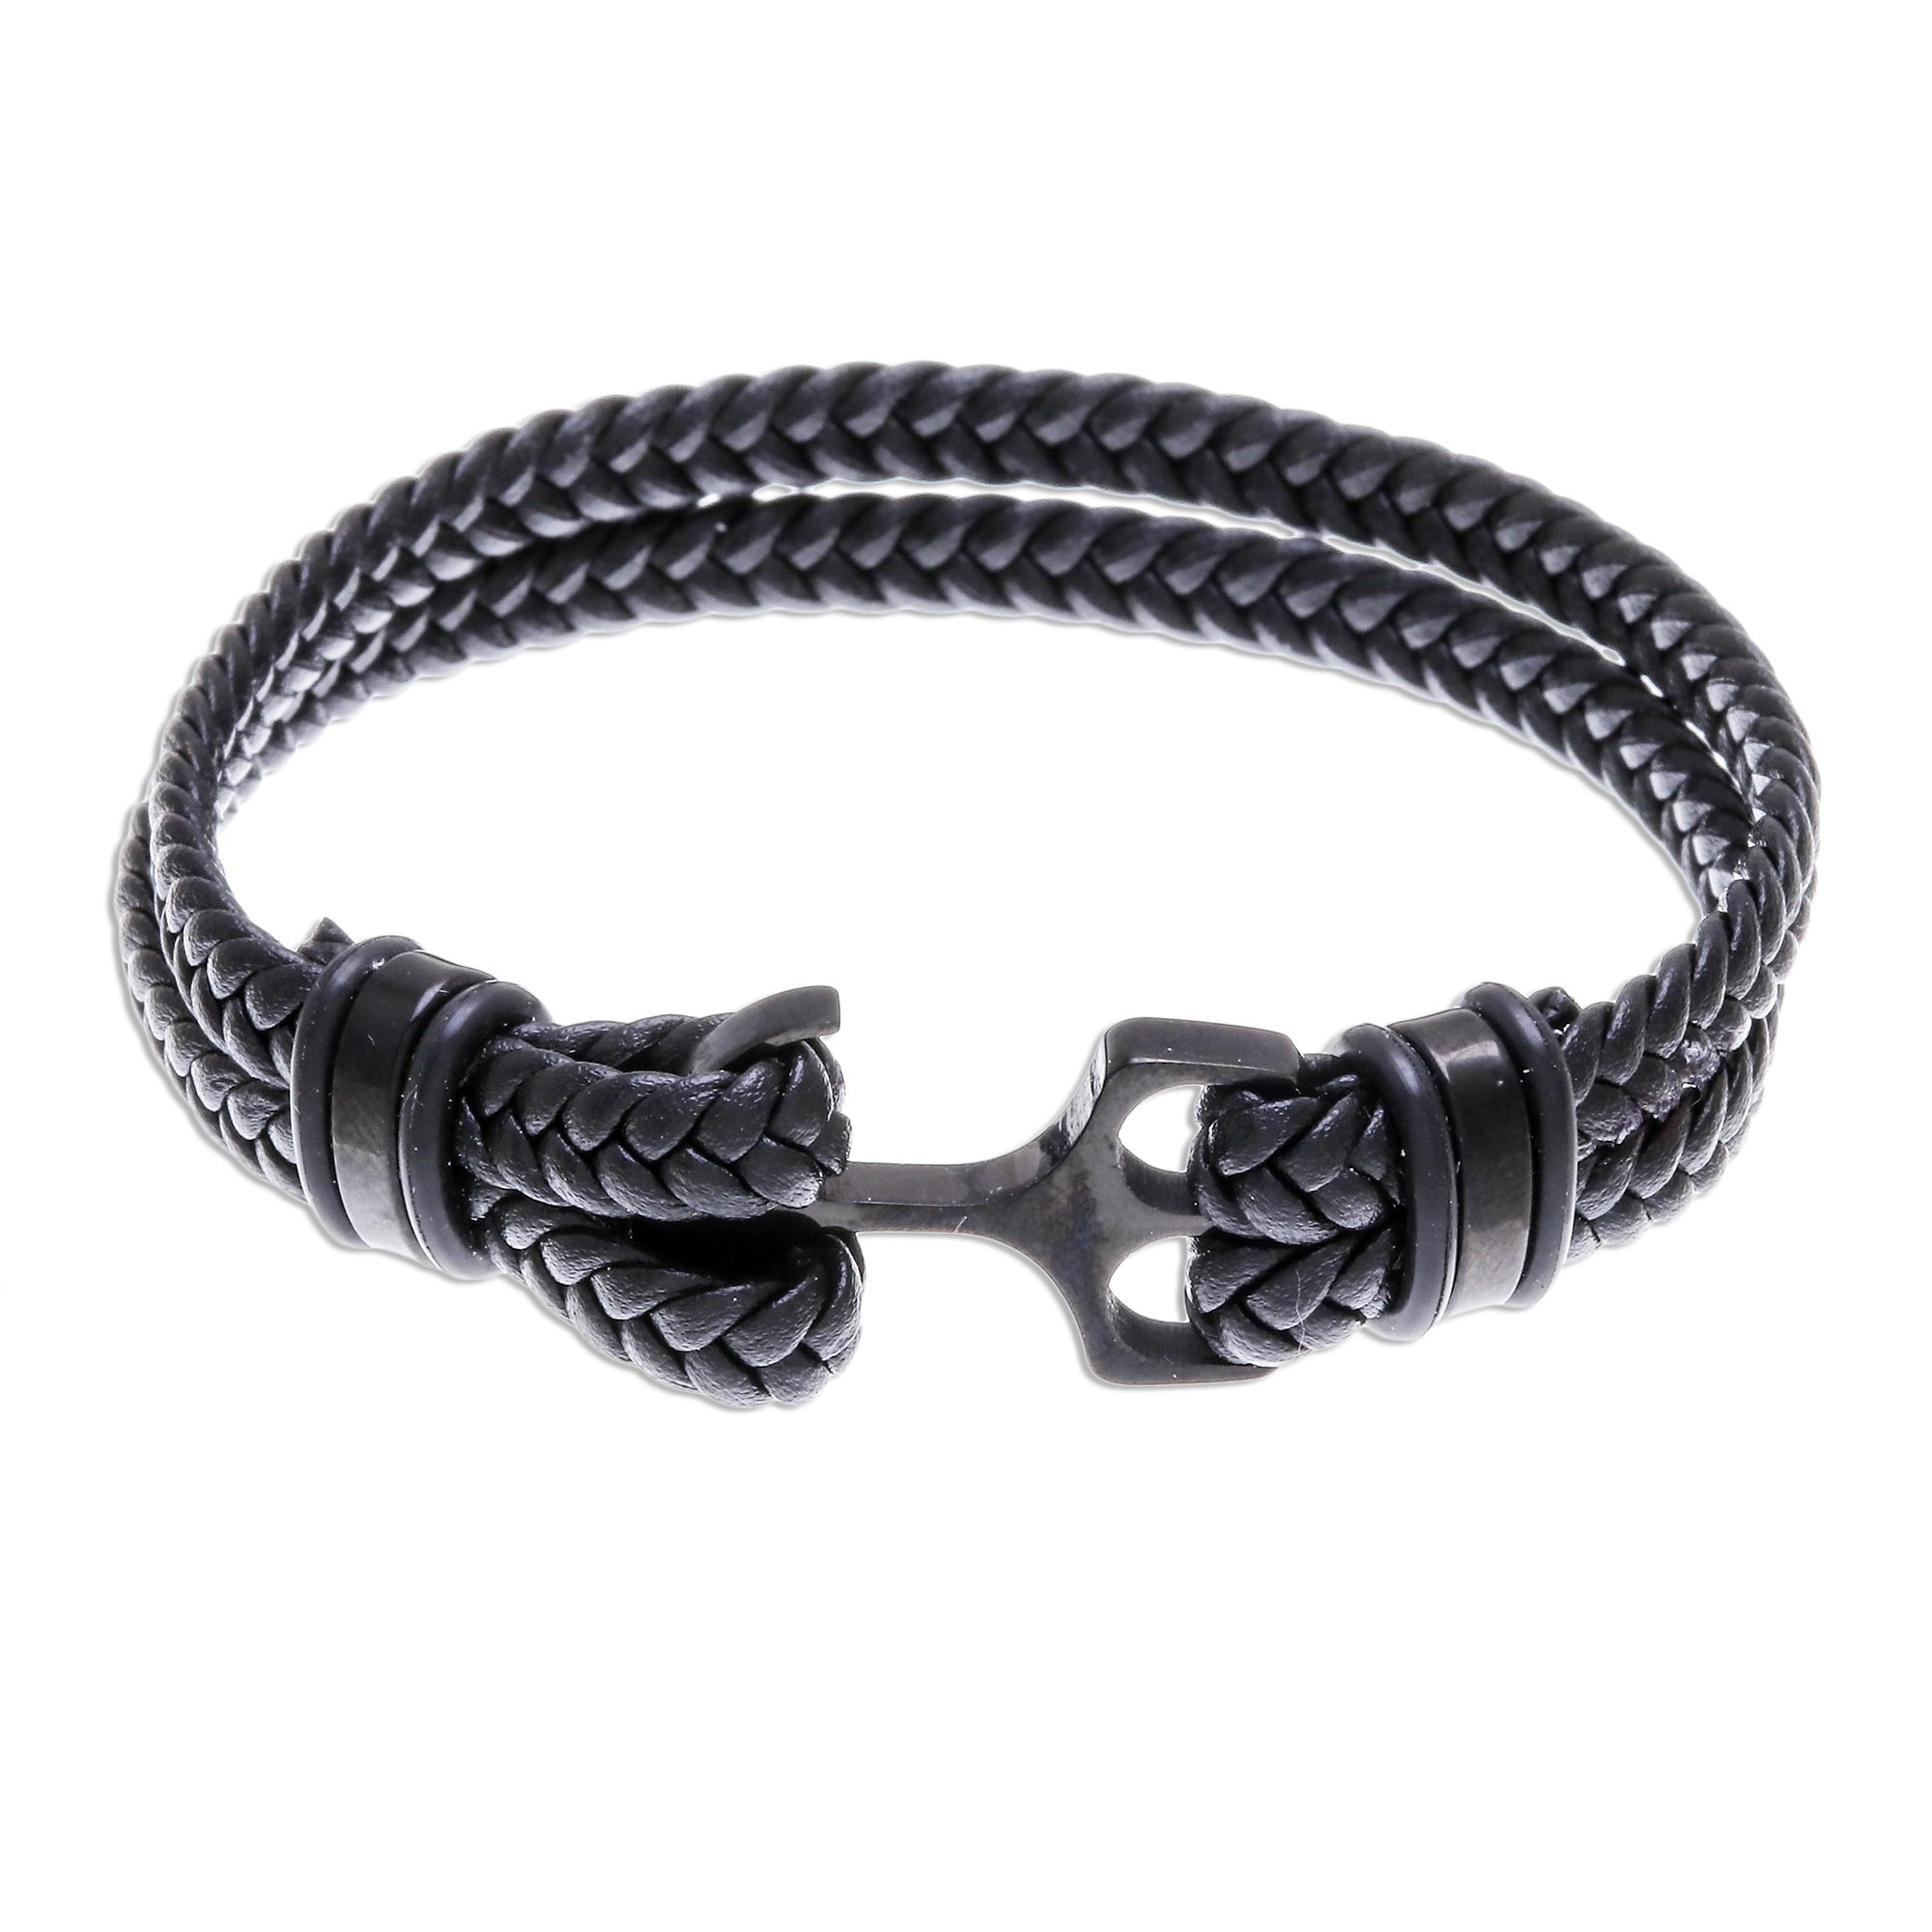 Leather Braided Wristband Bracelet in Black from Thailand - Anchor ...